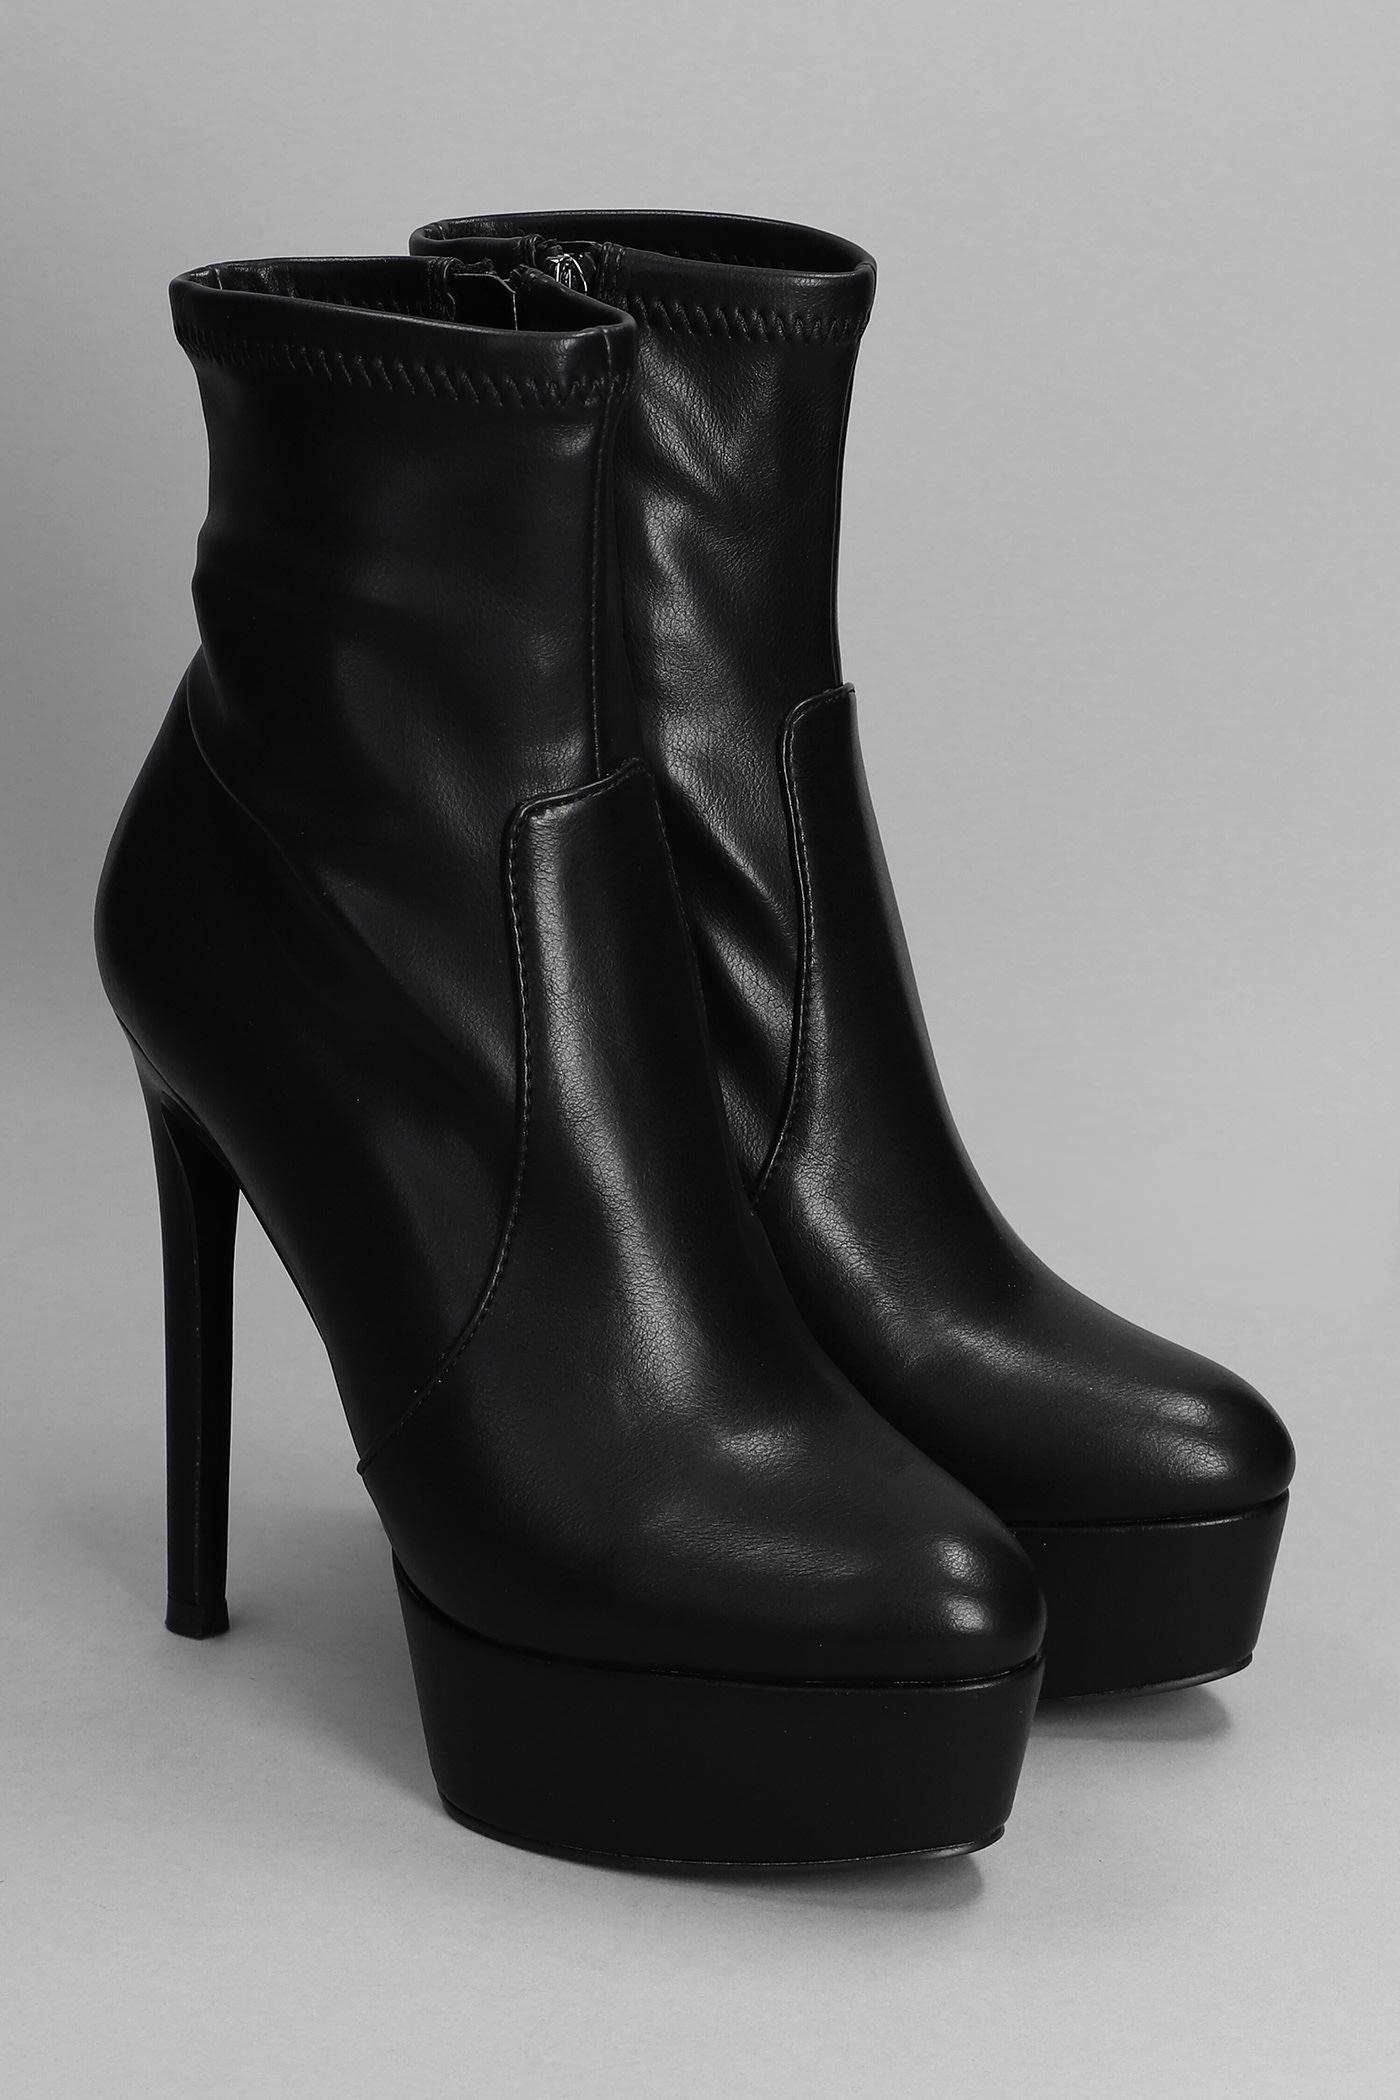 Steve Madden Tactical High Heels Ankle Boots In Black Leather | Lyst